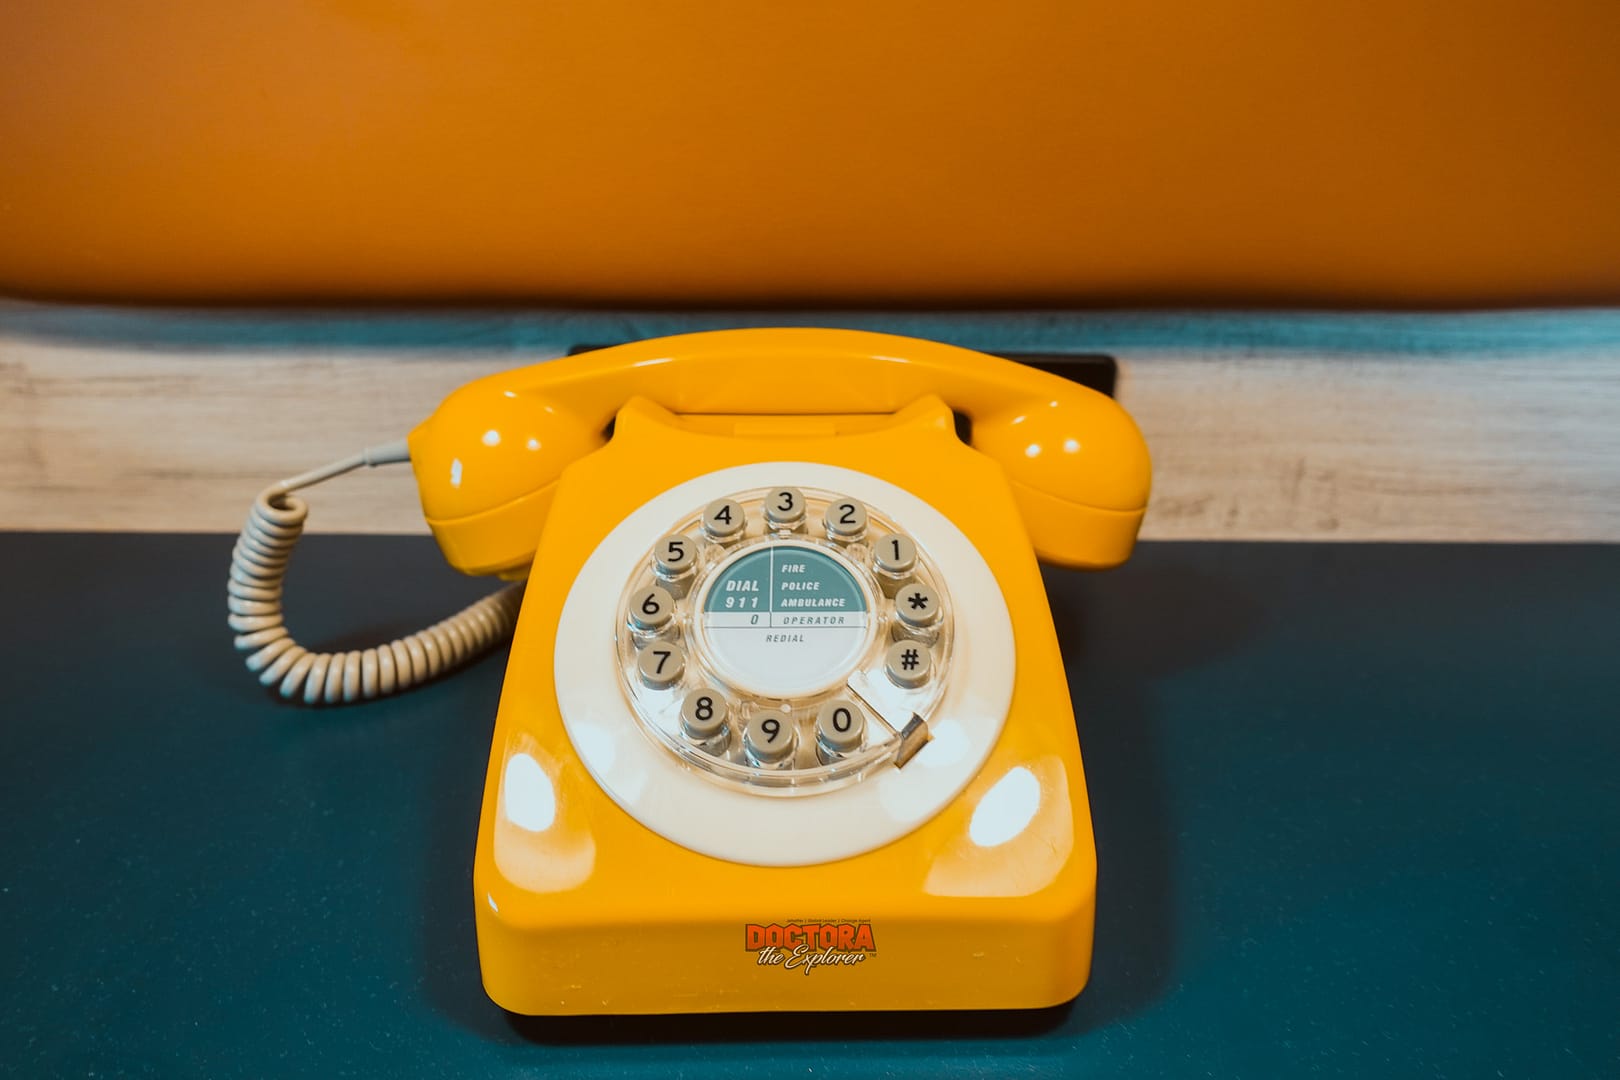 Hotel Denim - yellow rotary phone to add a nice pop of color